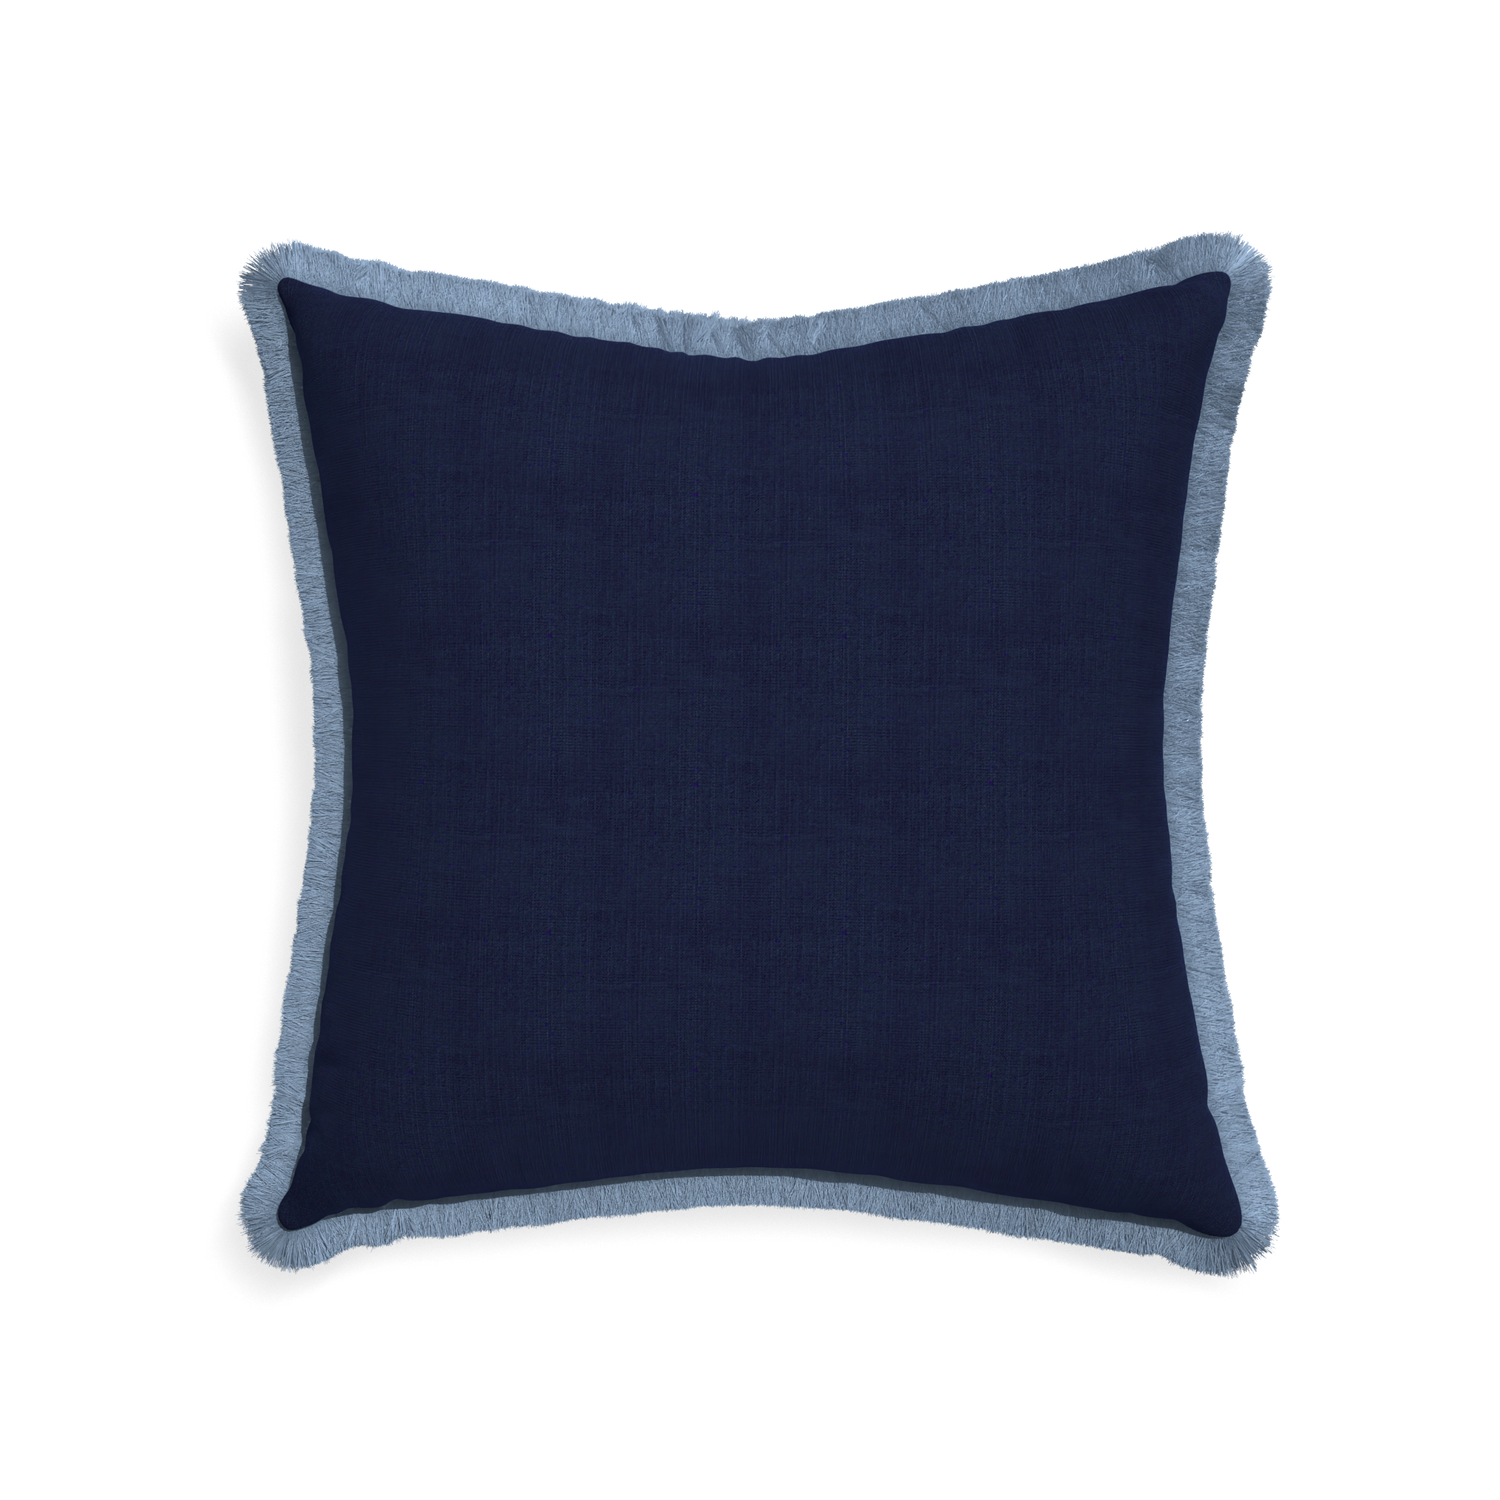 22-square midnight custom navy bluepillow with sky fringe on white background